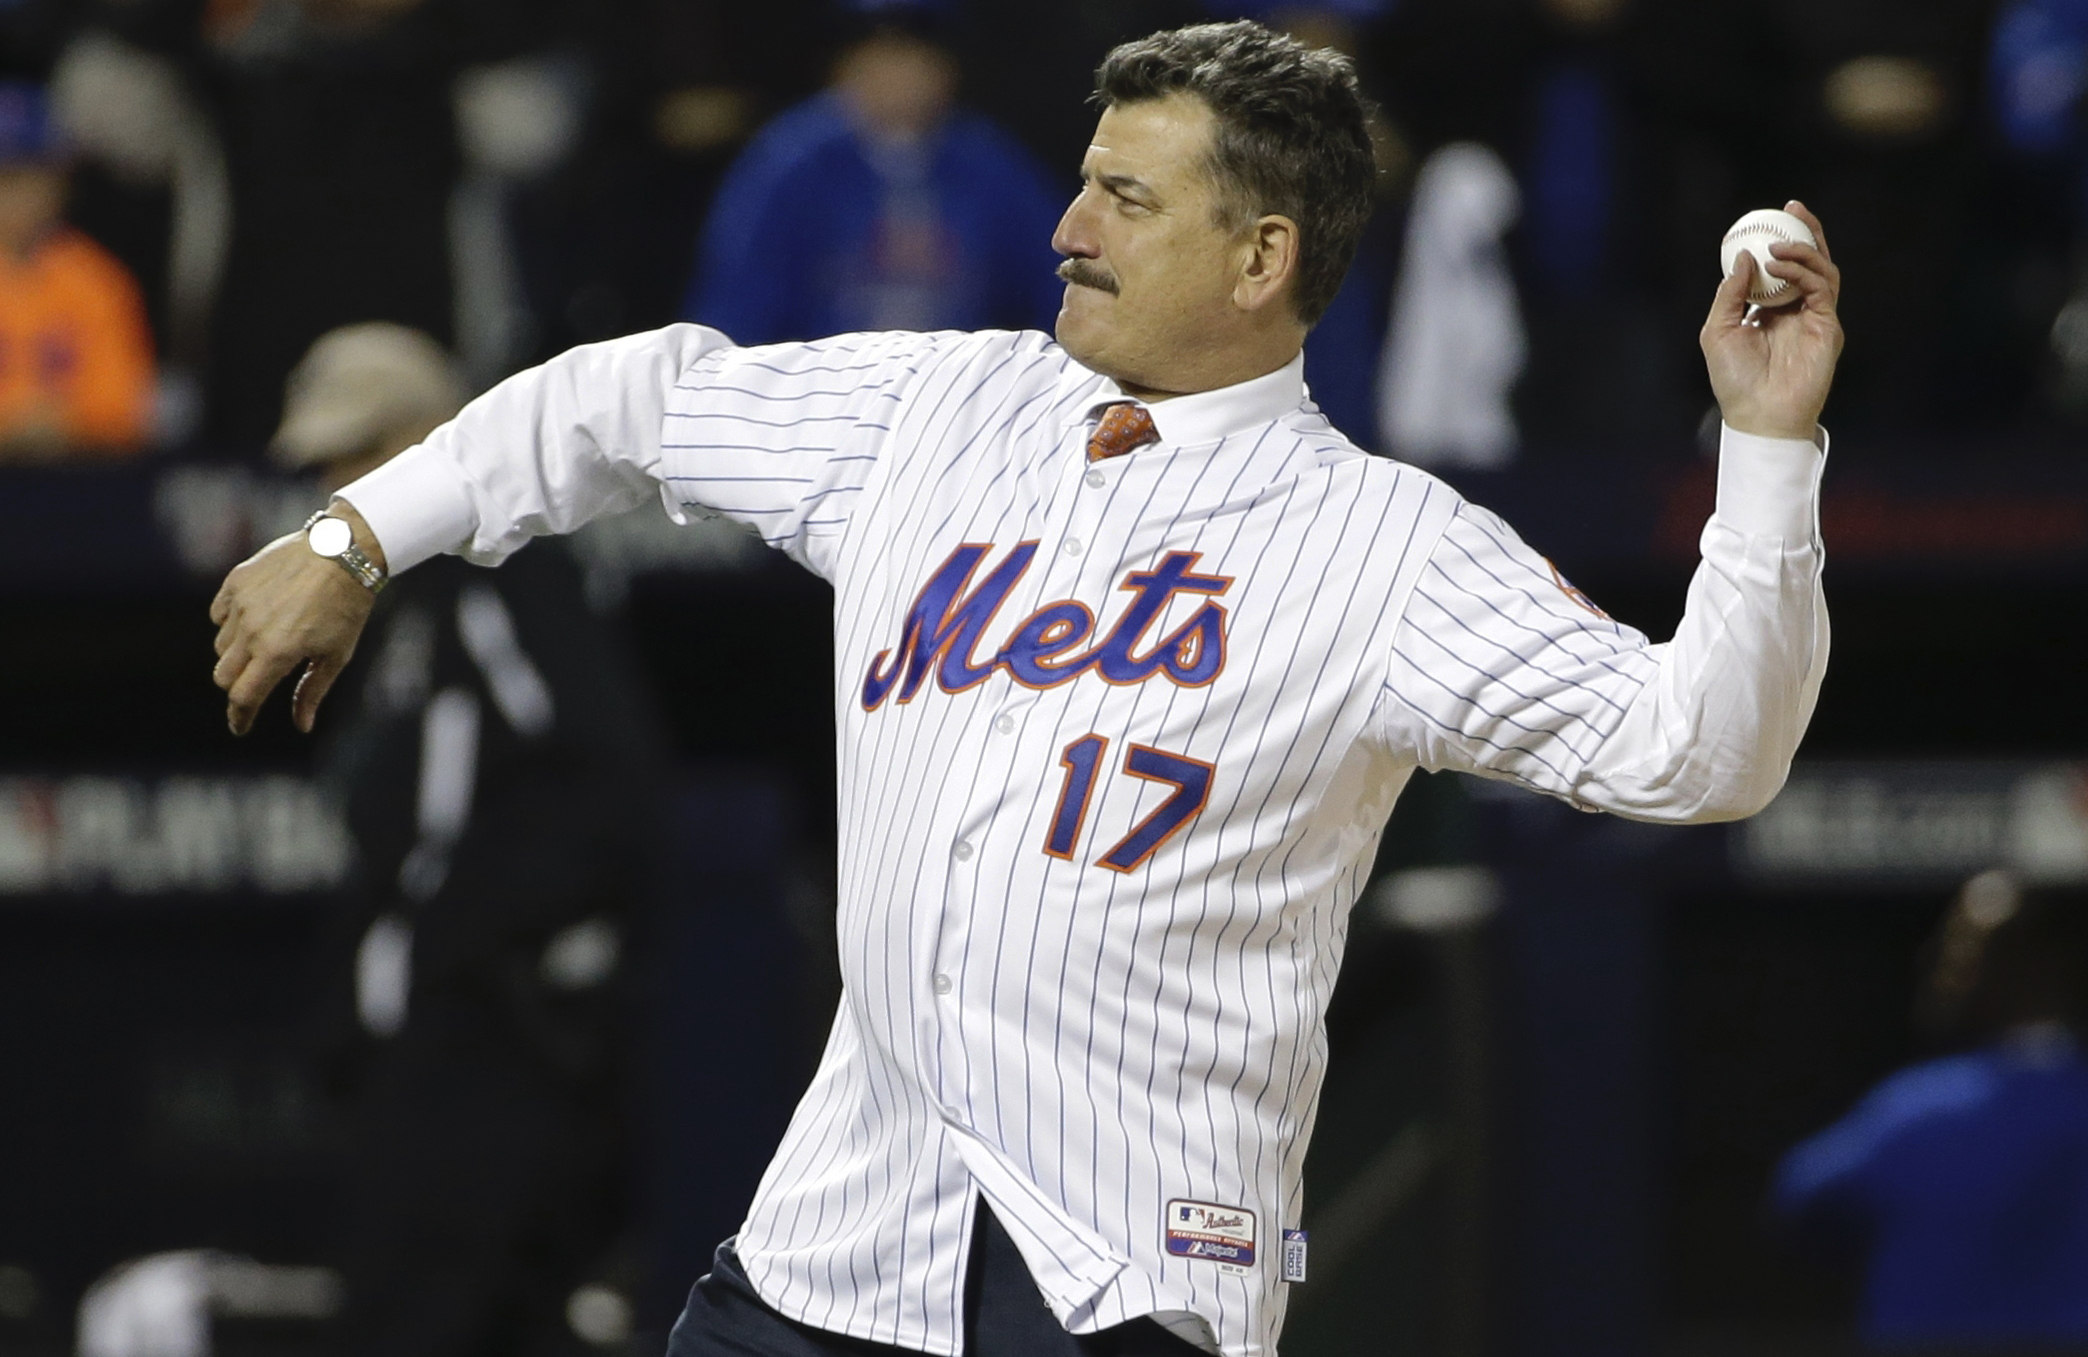 Mets legend Keith Hernandez is a Hall of Famer  with the